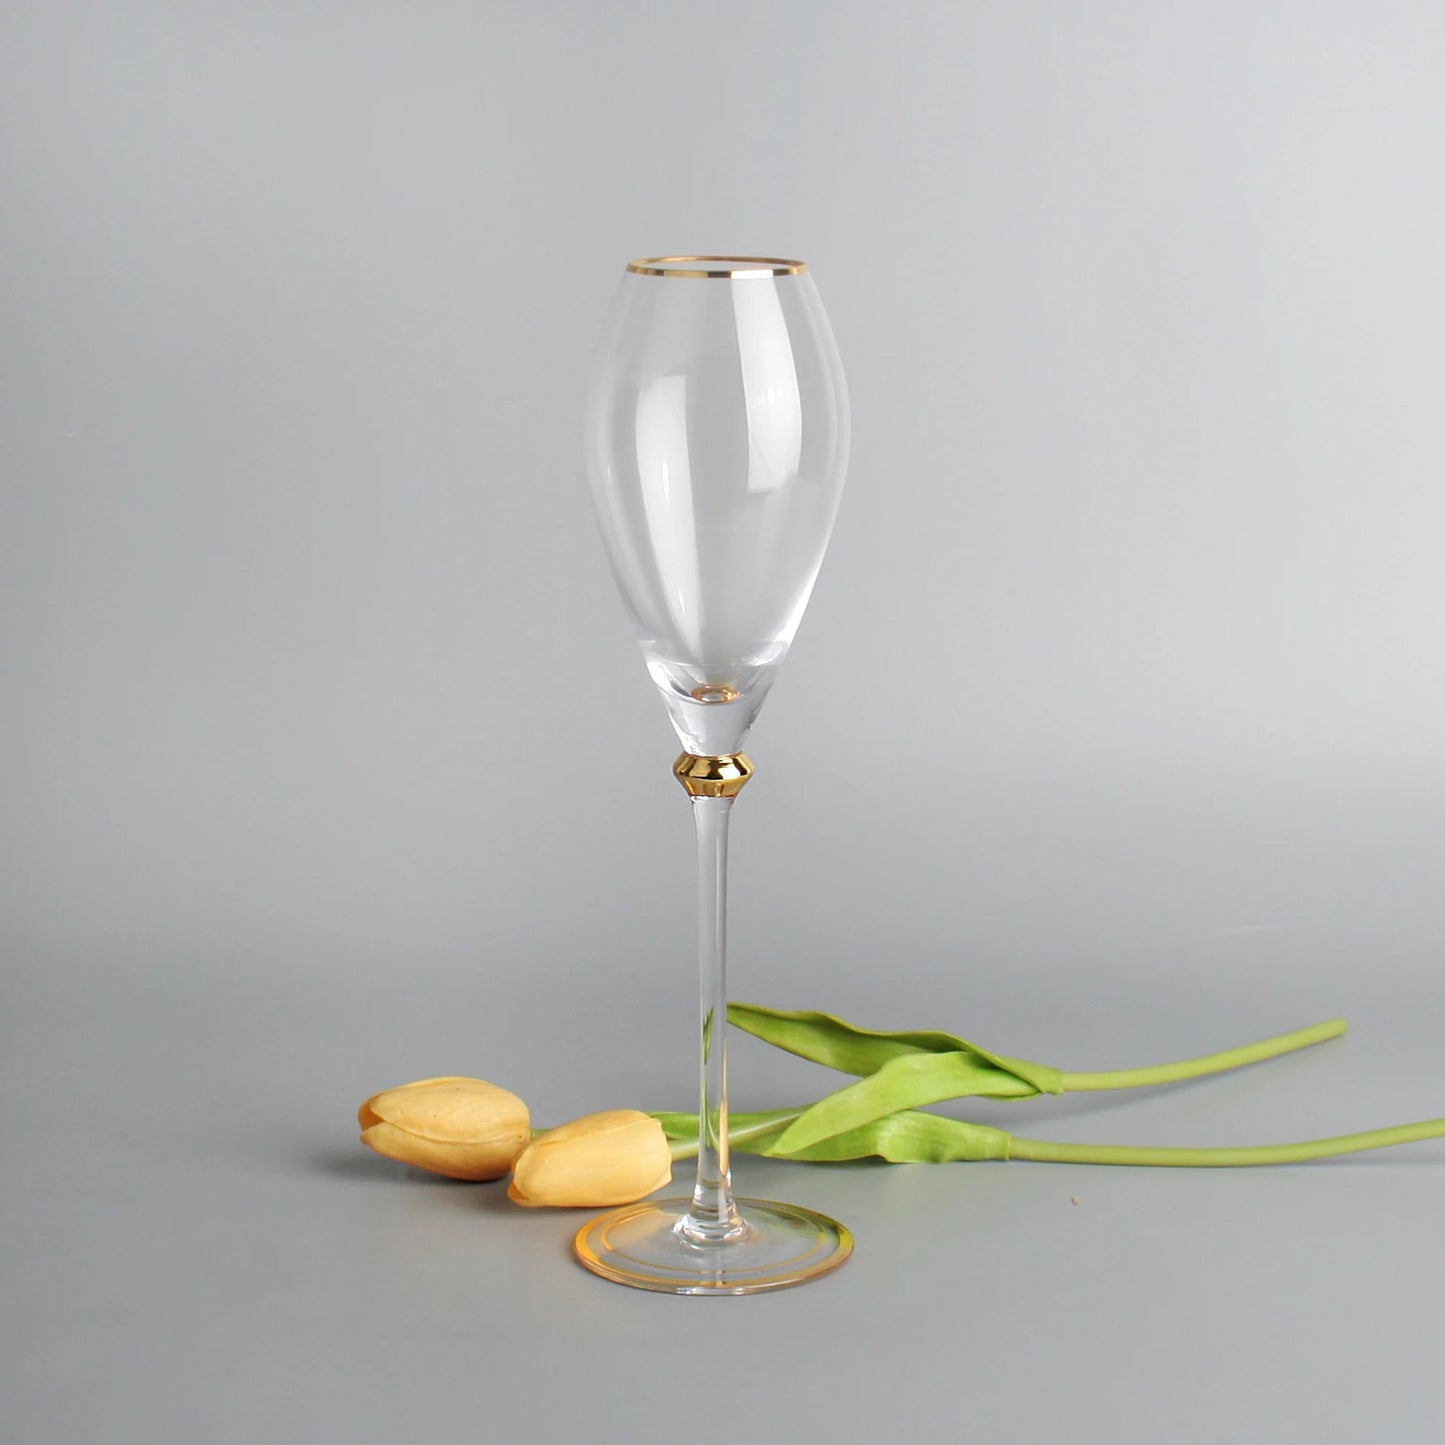 Premium Set of 2 Gold Rim Champagne Flutes with Gold Accents - 250ml